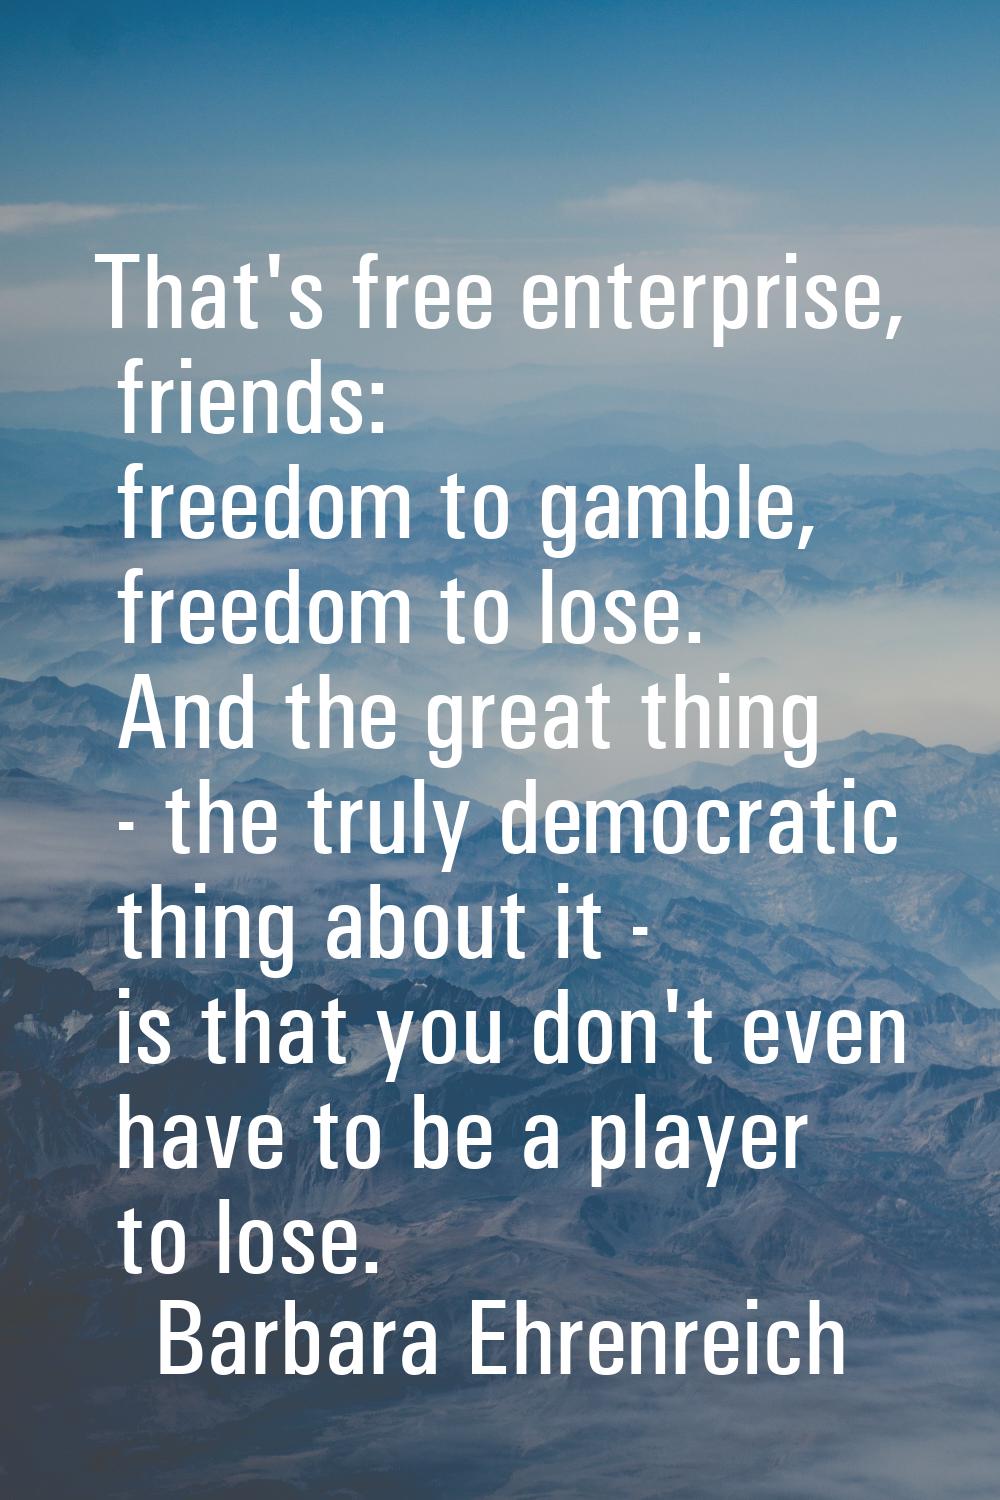 That's free enterprise, friends: freedom to gamble, freedom to lose. And the great thing - the trul